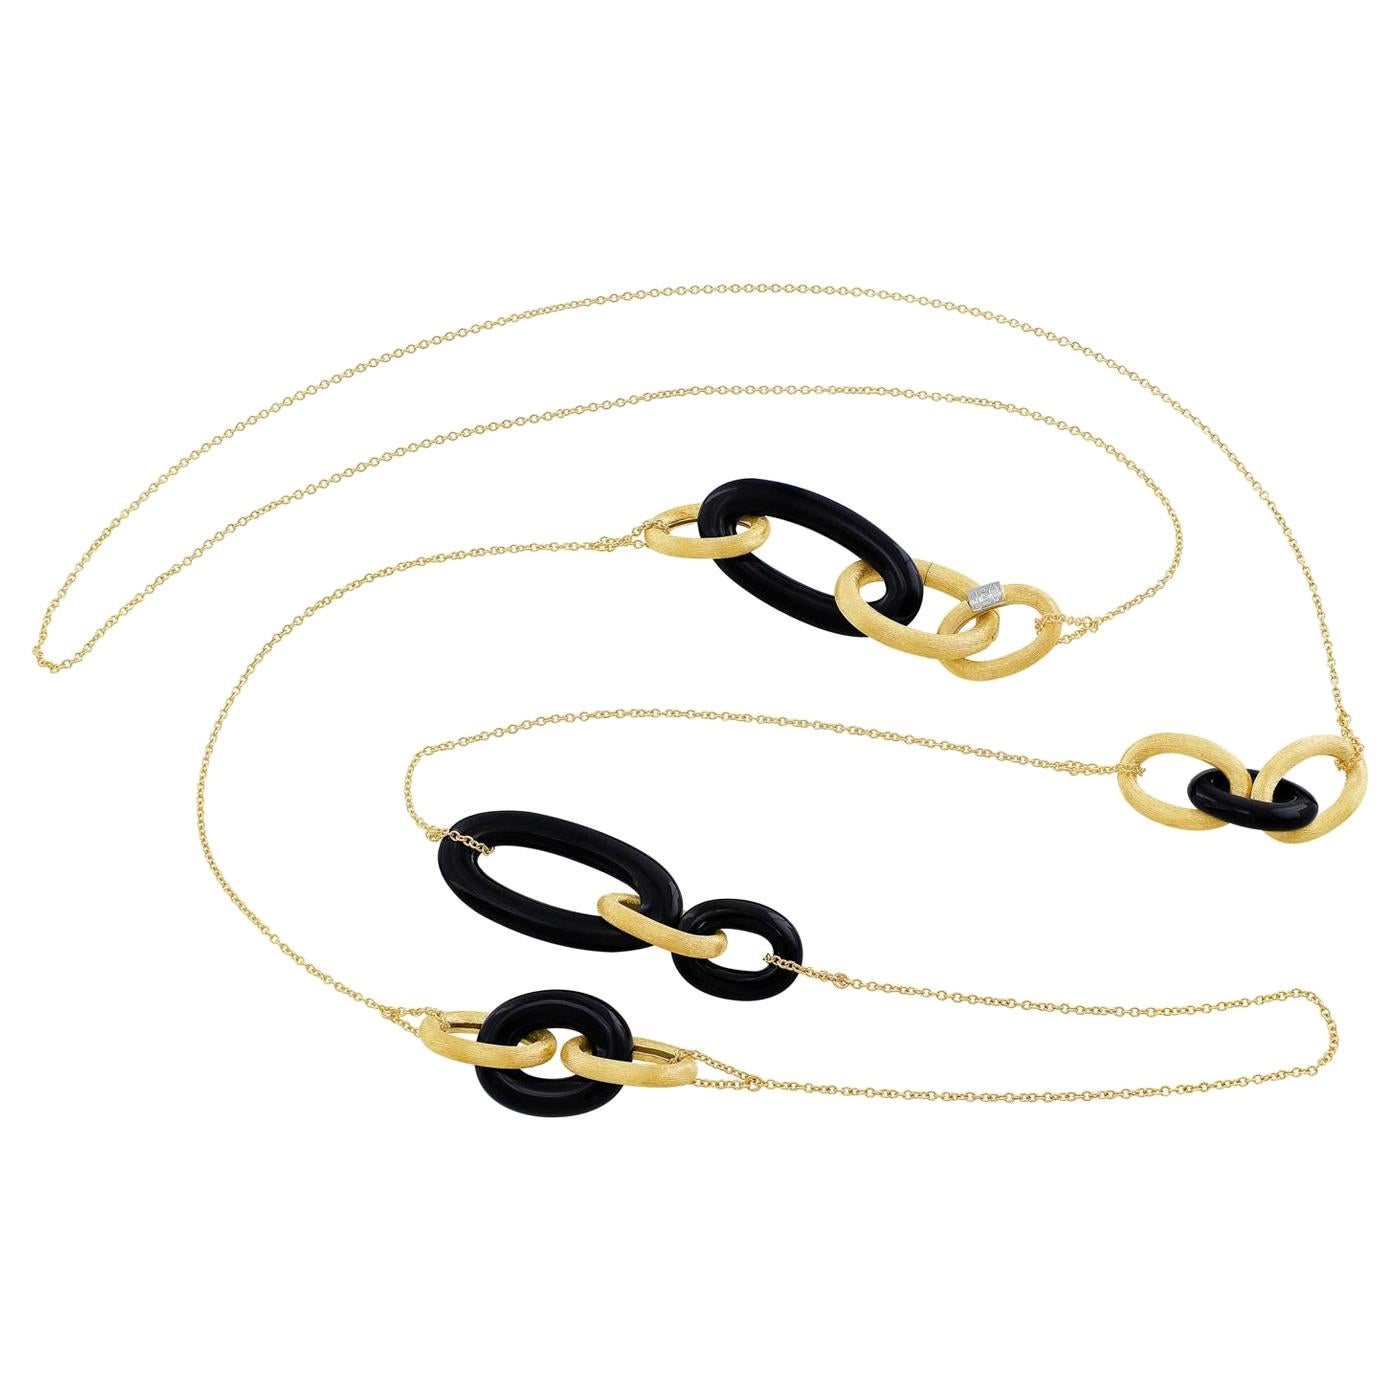 Nanis Olga 18 Karat Yellow Gold and Onyx Contemporary Necklace For Sale